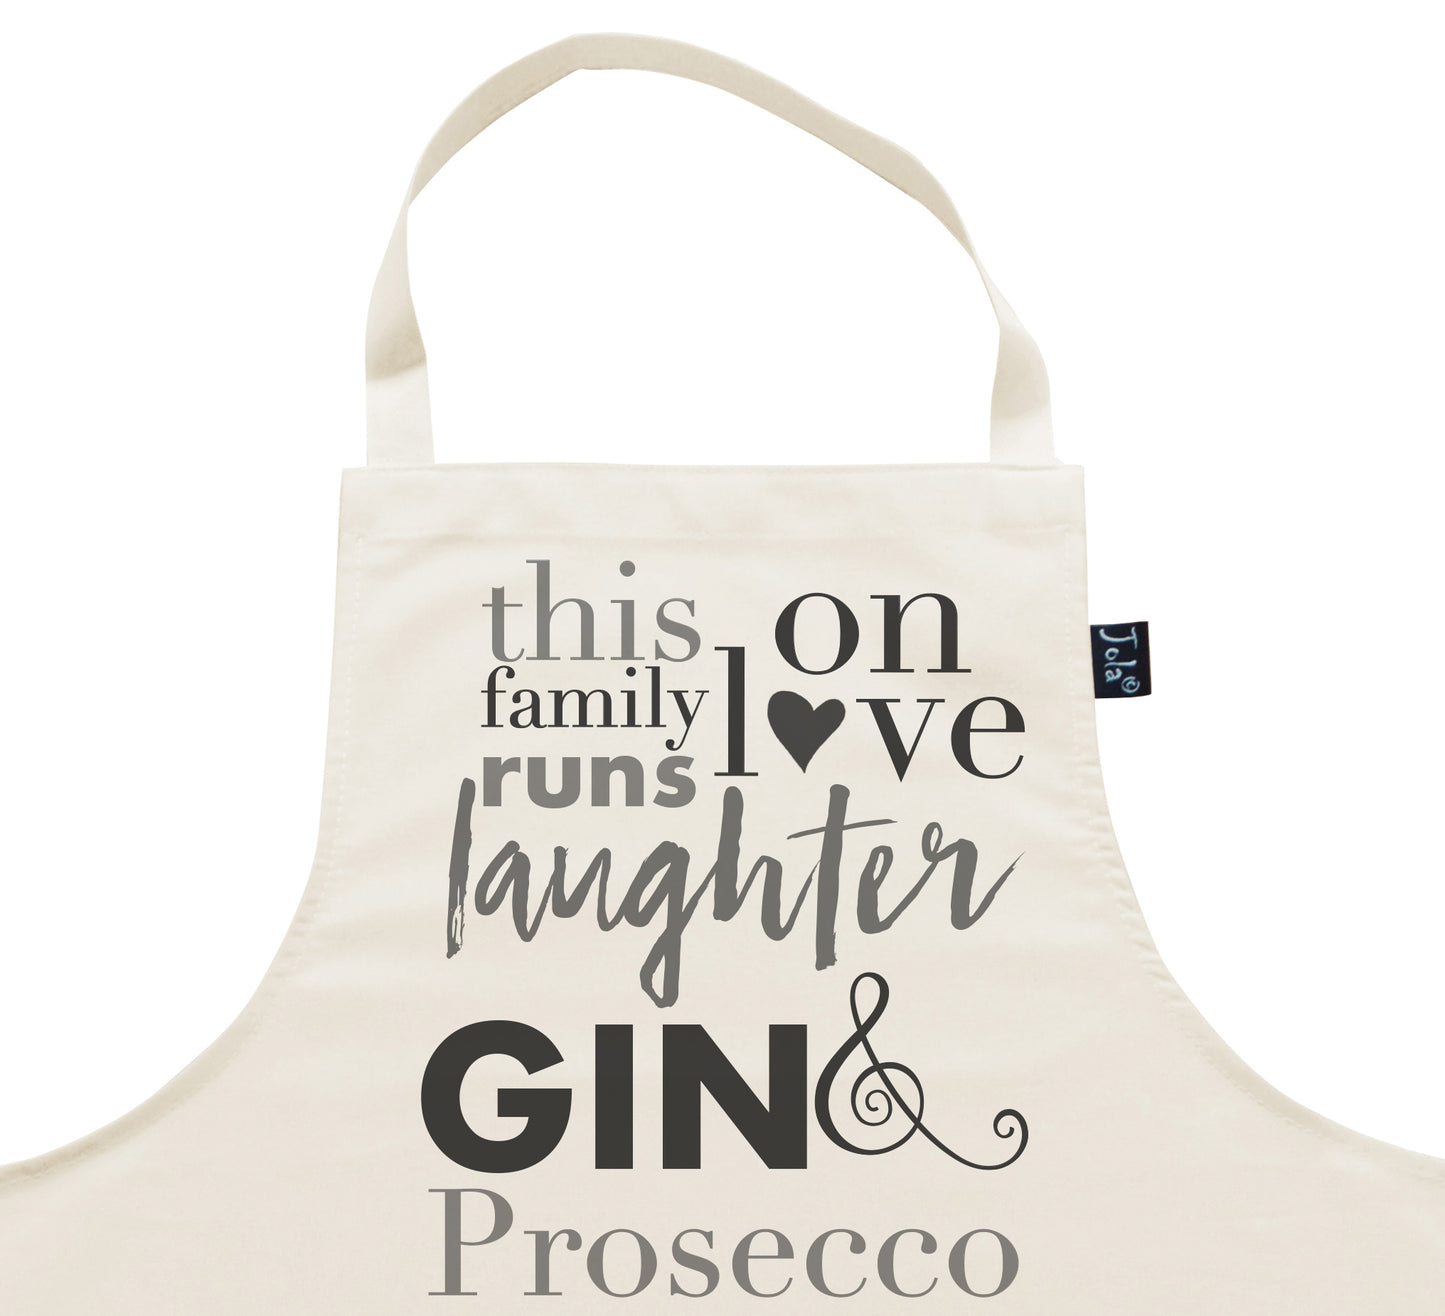 This Family Love Prosecco and Gin Apron